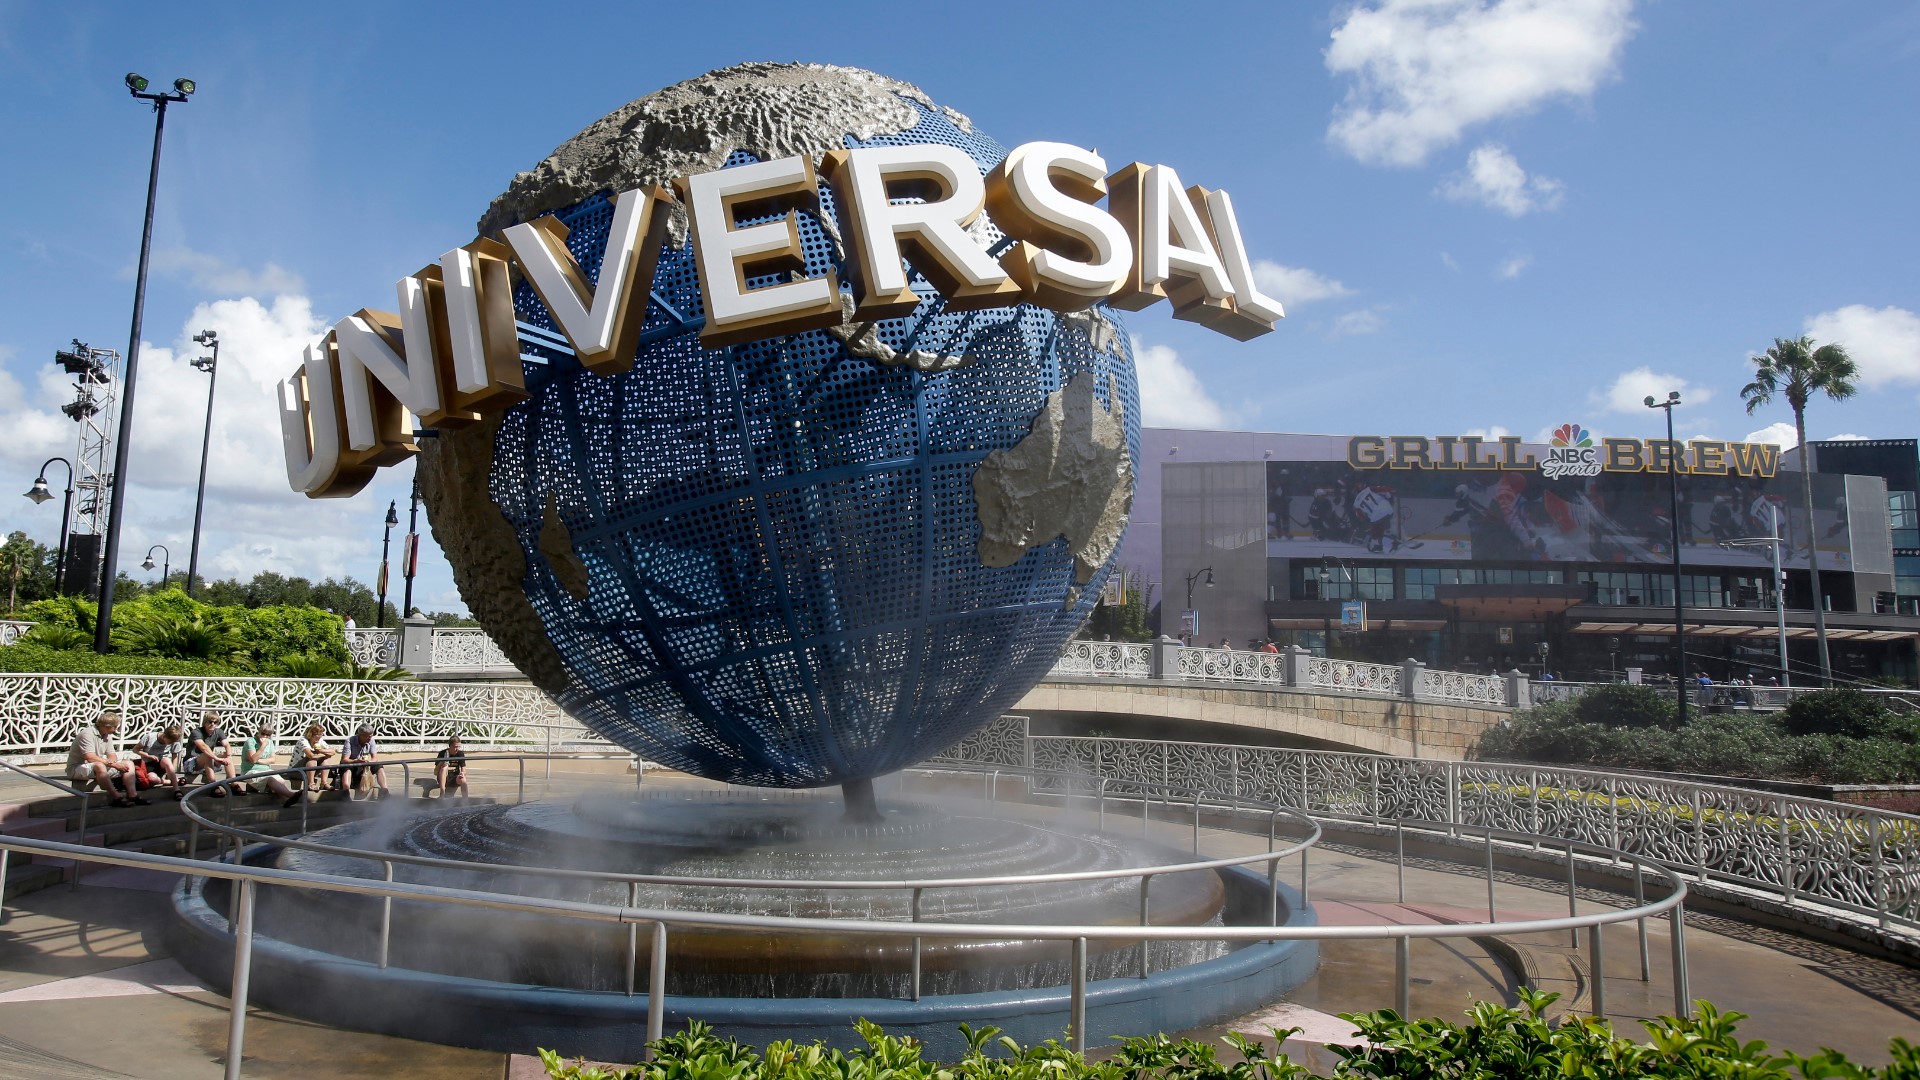 Universal Orlando Resort is keeping its theme parks and hotels closed even longer to combat the spread of COVID-19.